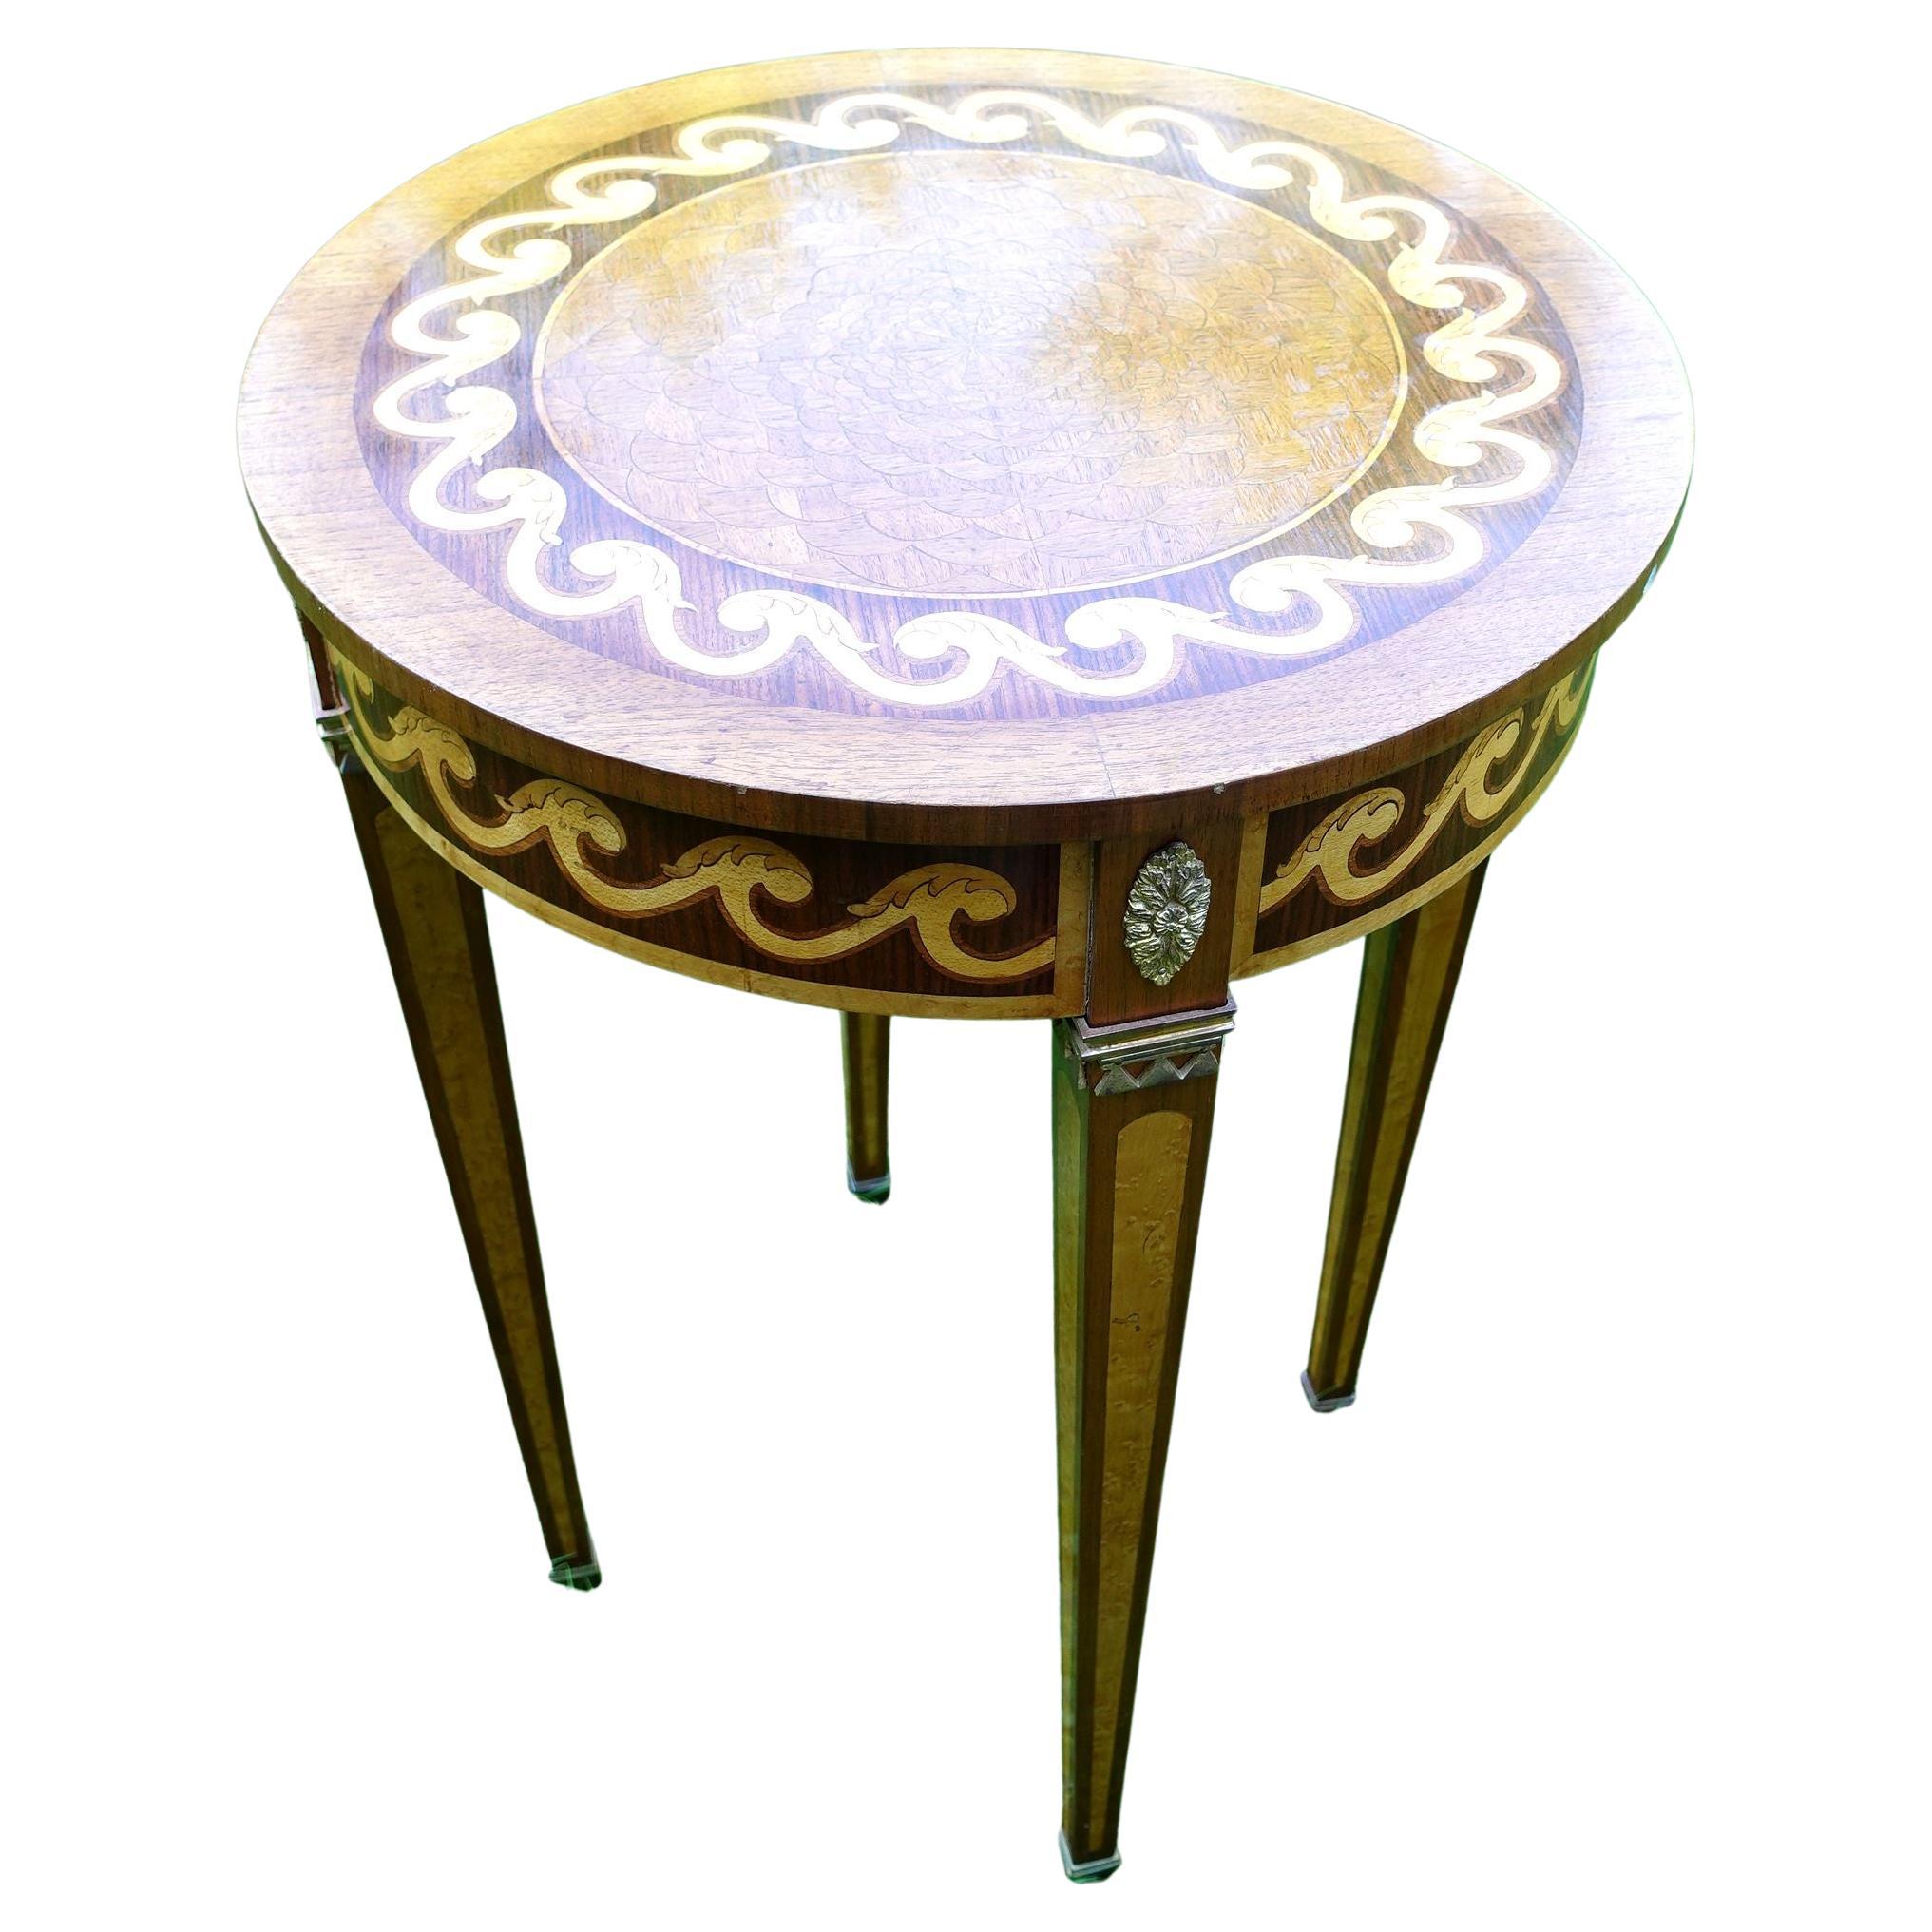 Neoclassical Style Italian Inlaid Drum Table For Sale